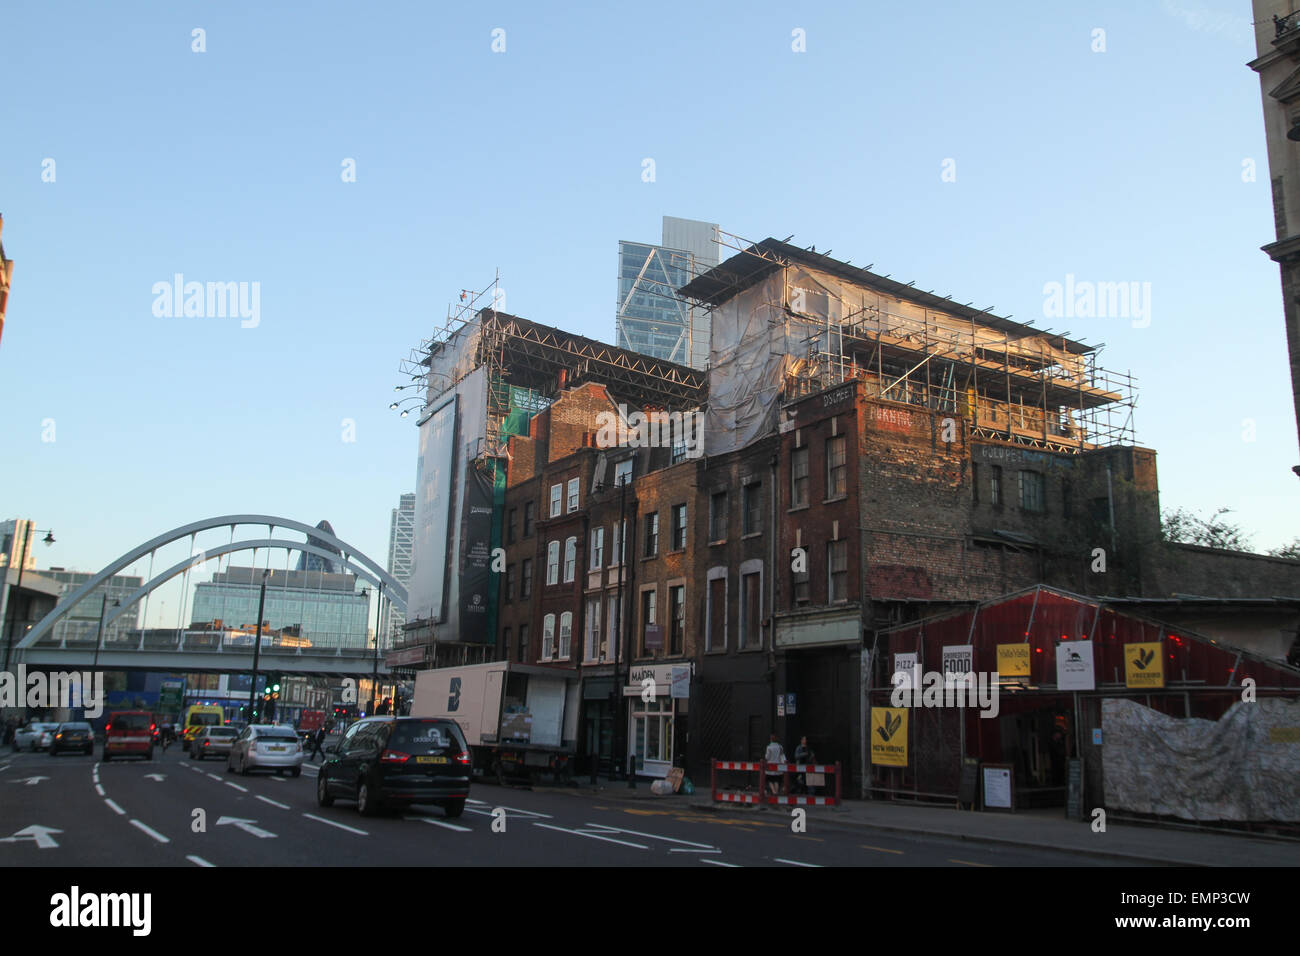 London, UK. 21 April 2015. New and the old. Top of the Broadgate Tower seen from Commercial Street.  Credit: David Mbiyu/ Alamy Stock Photo